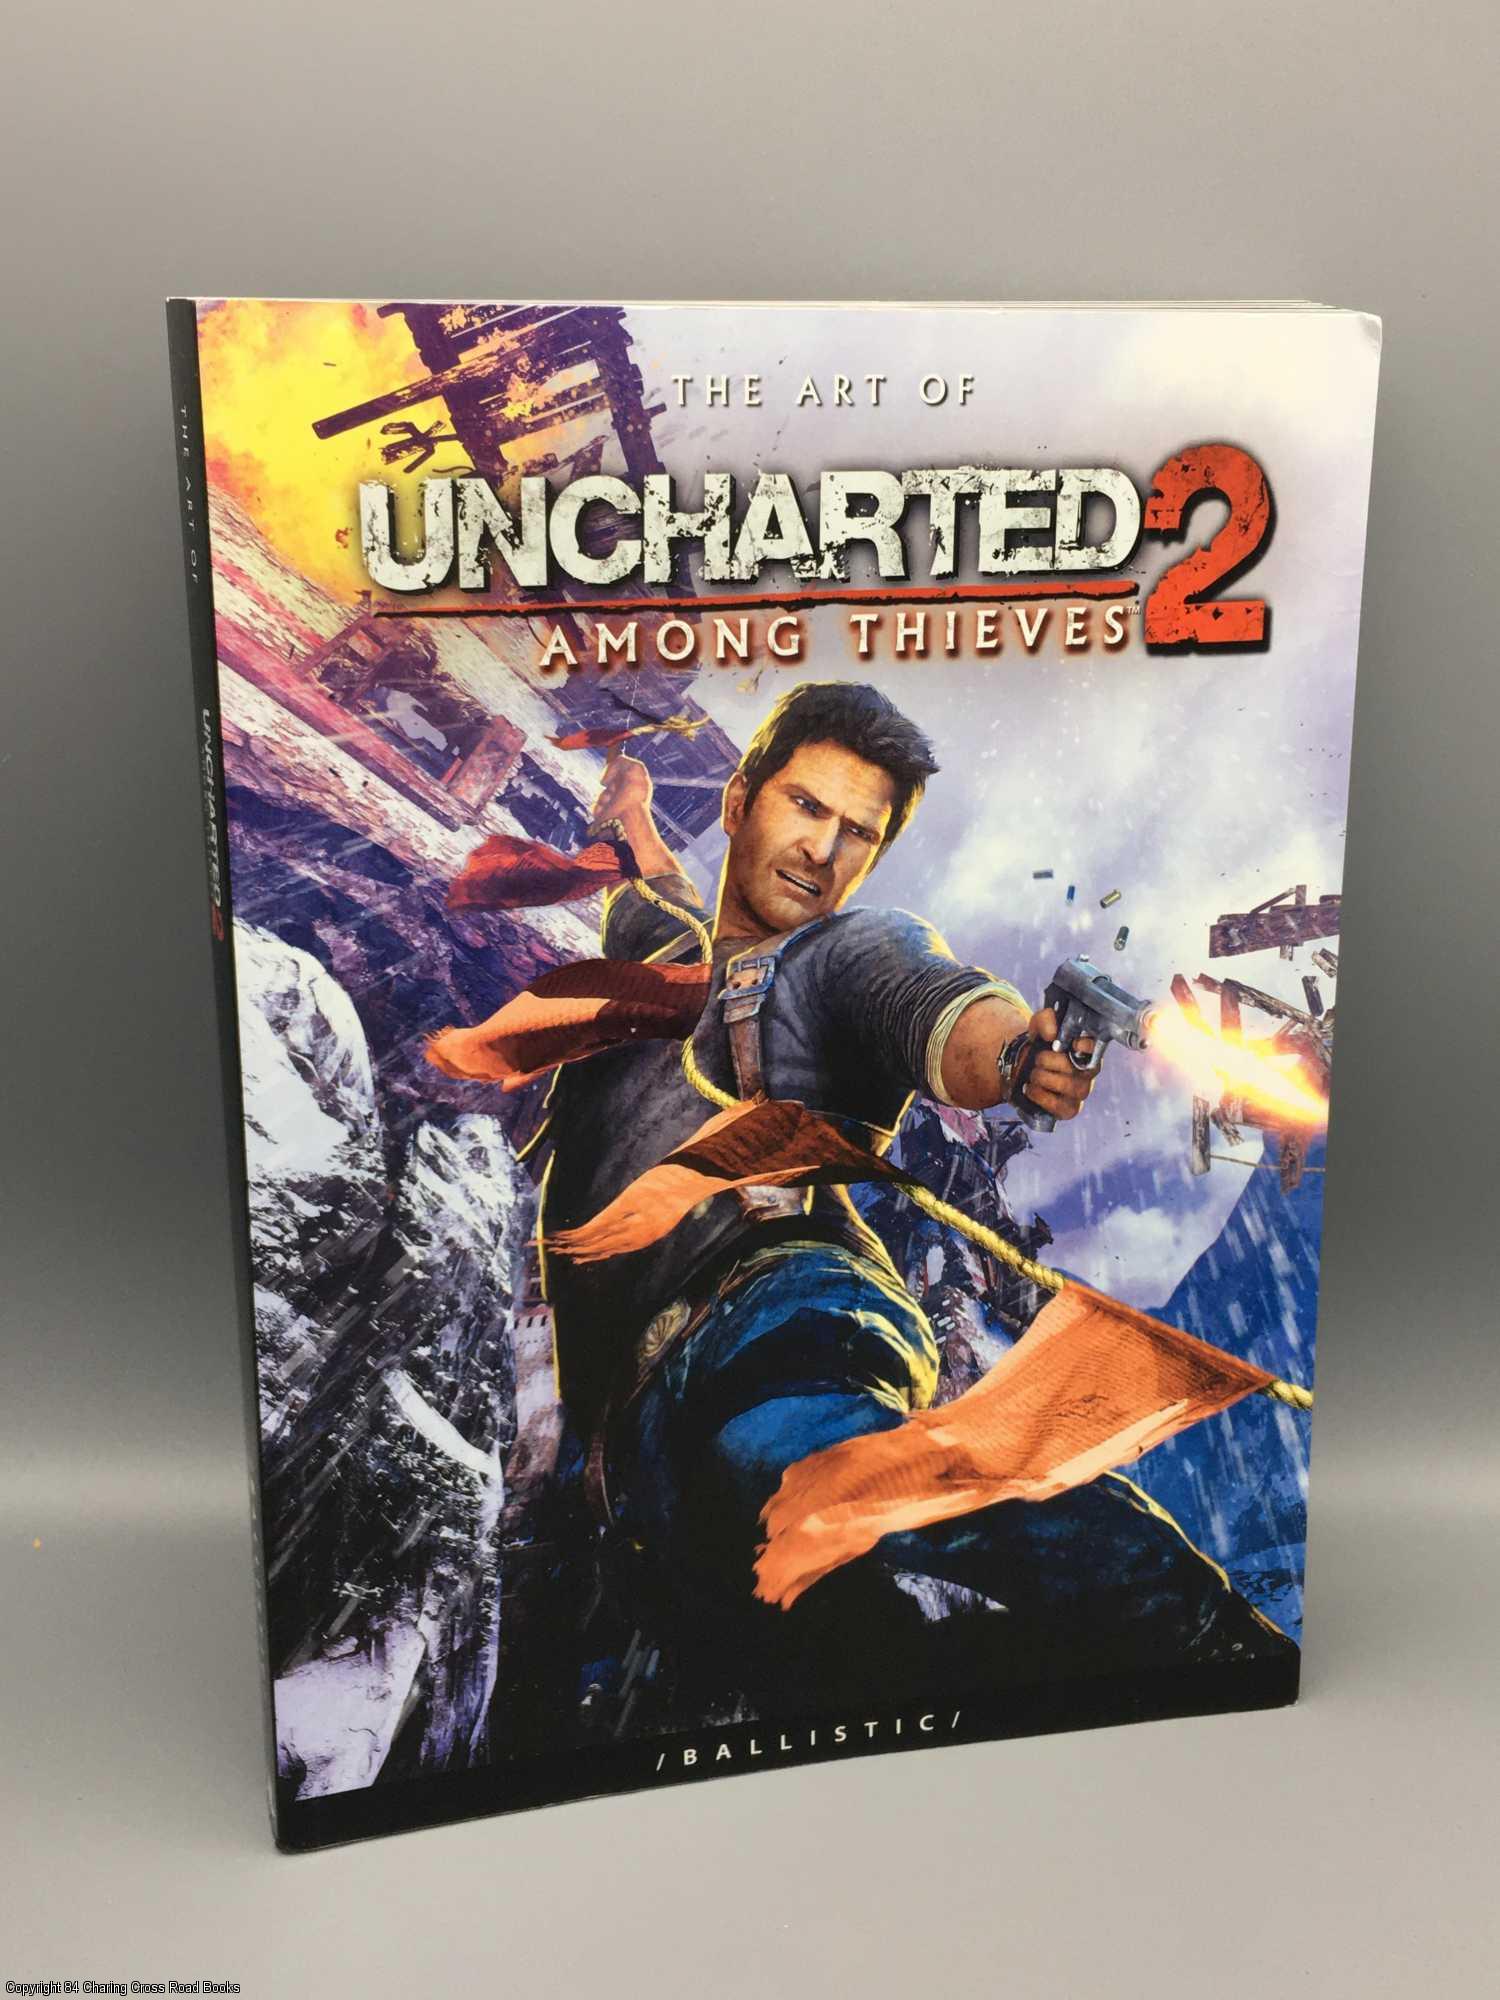 The Art of Uncharted 2: Among Thieves The Art of the Game by Daniel Wade on  84 Charing Cross Rare Books